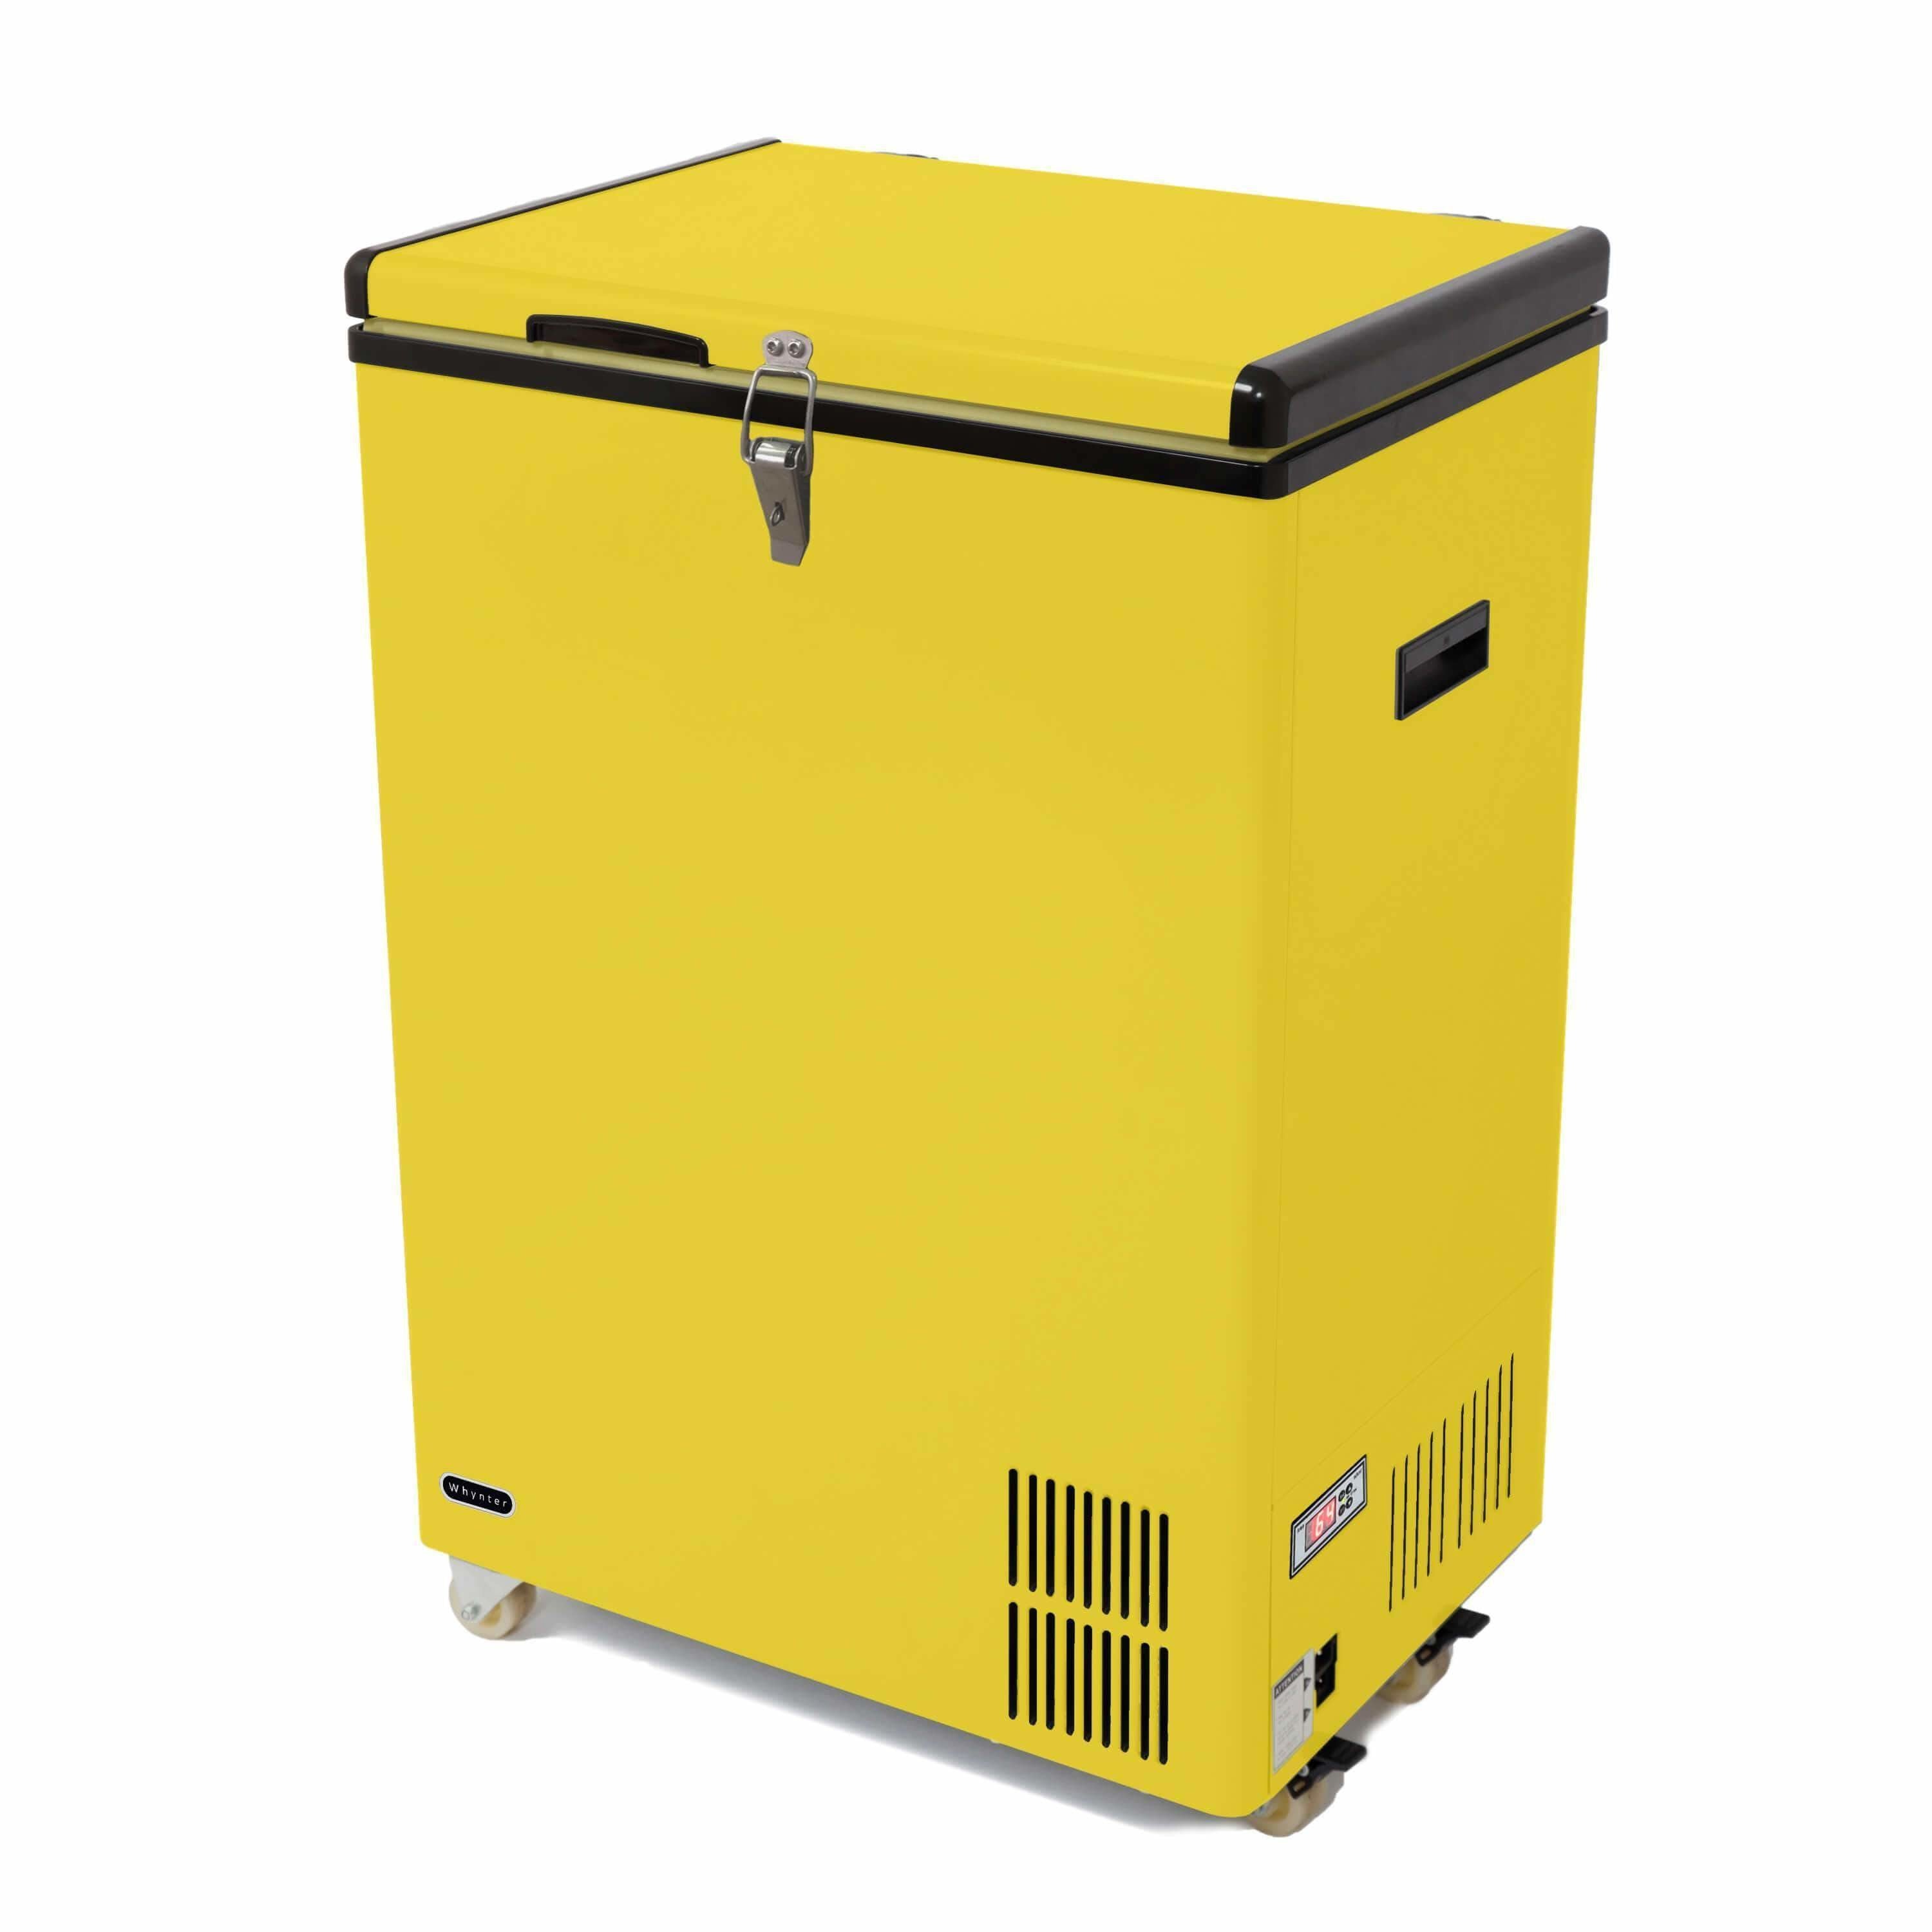 Whynter 95 Quart Portable Fridge / Freezer - Limited Edition Yellow FM-951YW Wine Coolers Empire